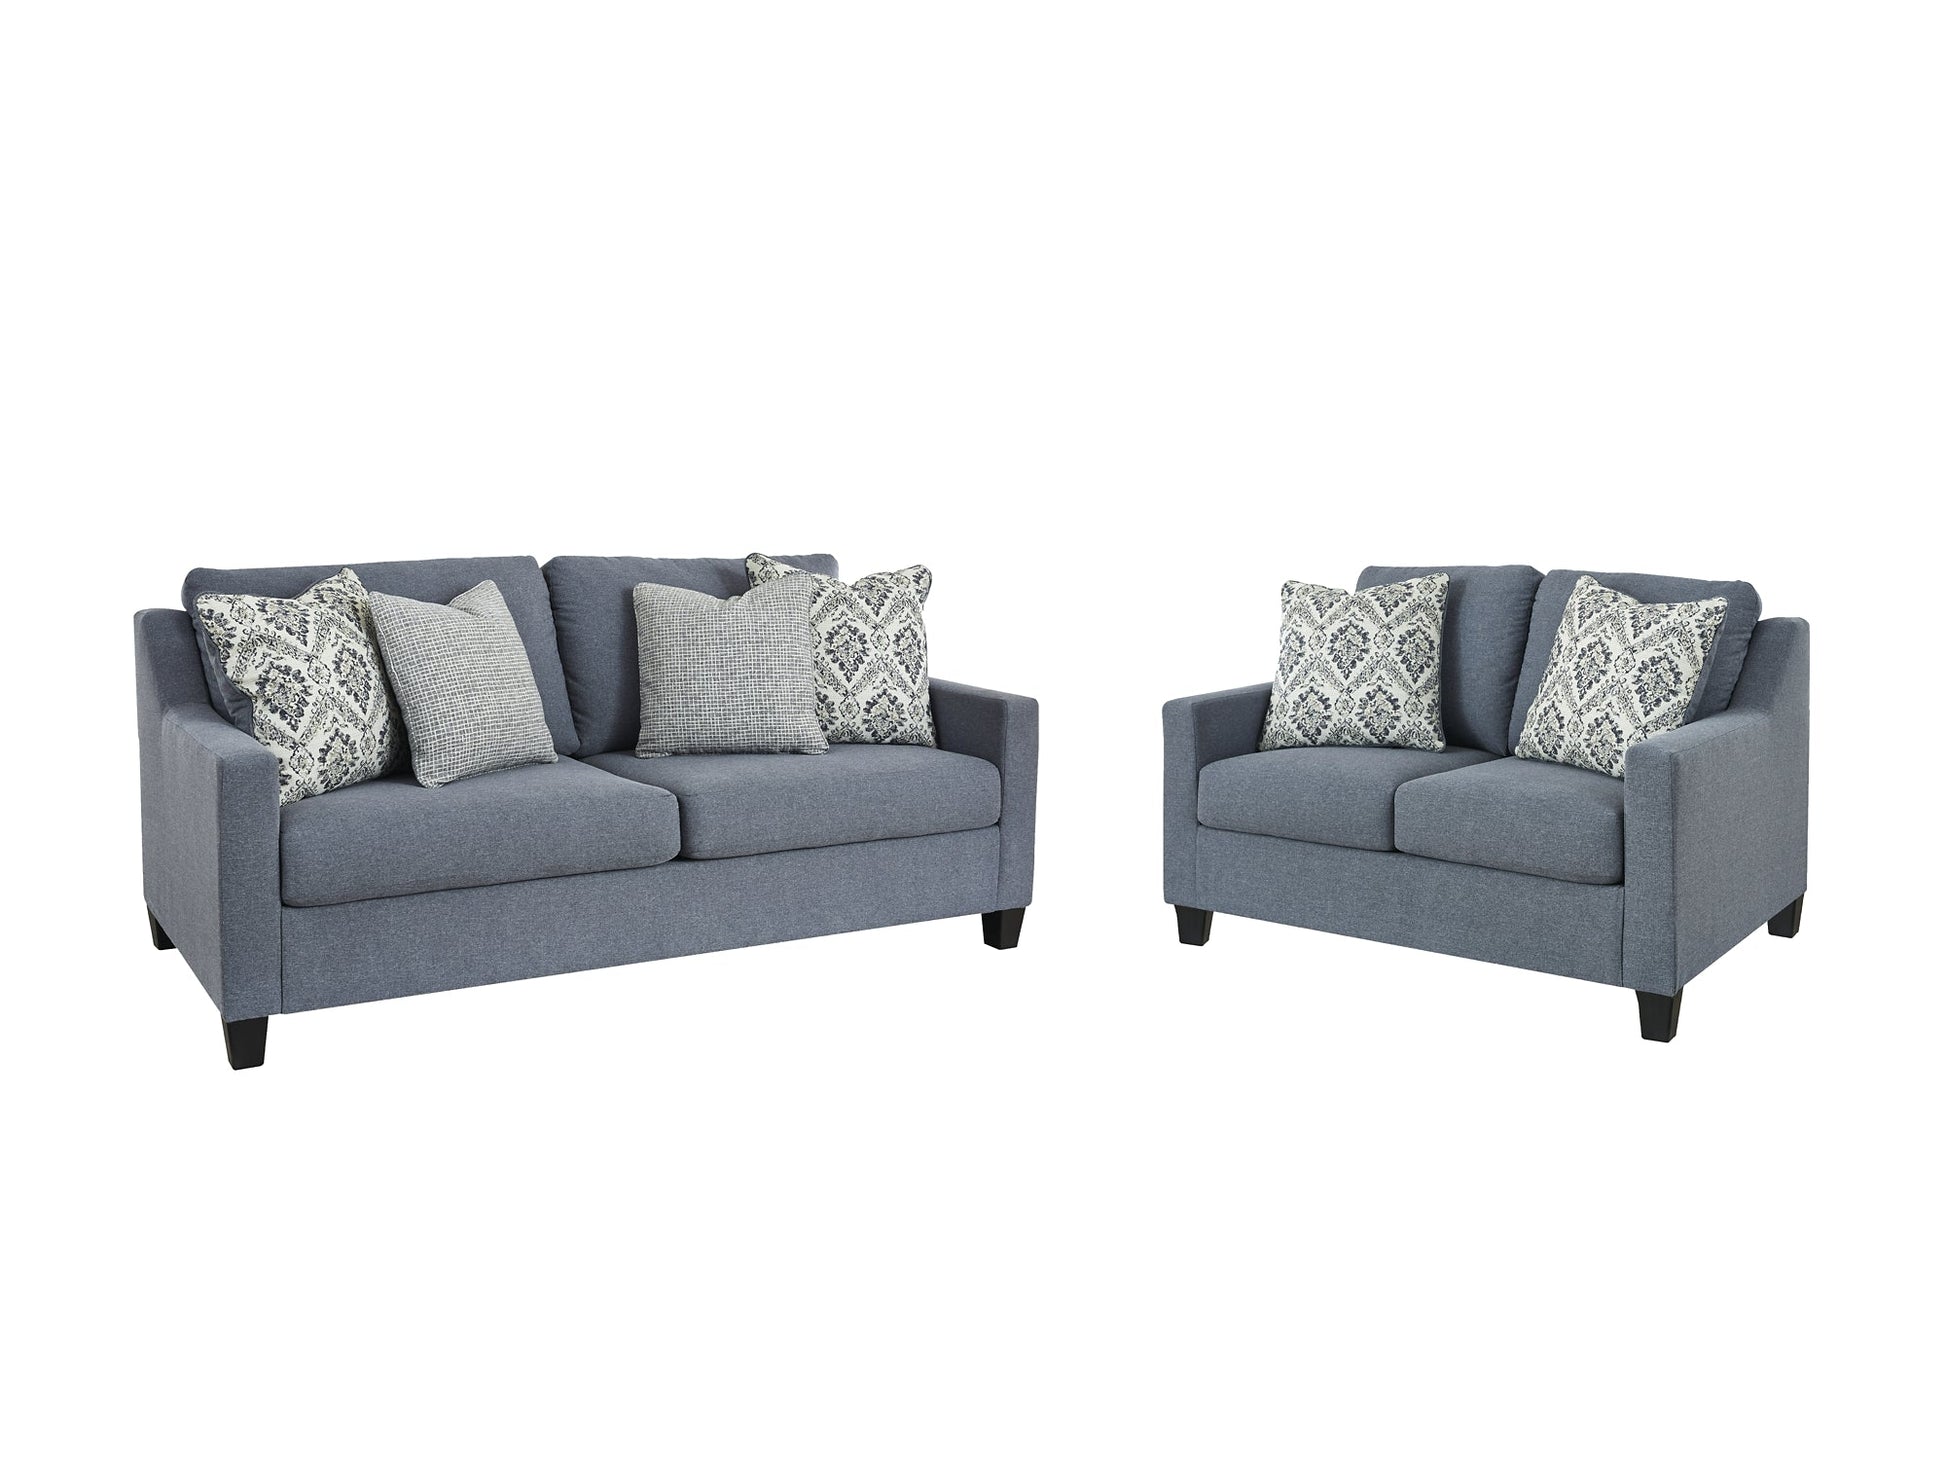 Lemly Sofa and Loveseat Rent Wise Rent To Own Jacksonville, Florida